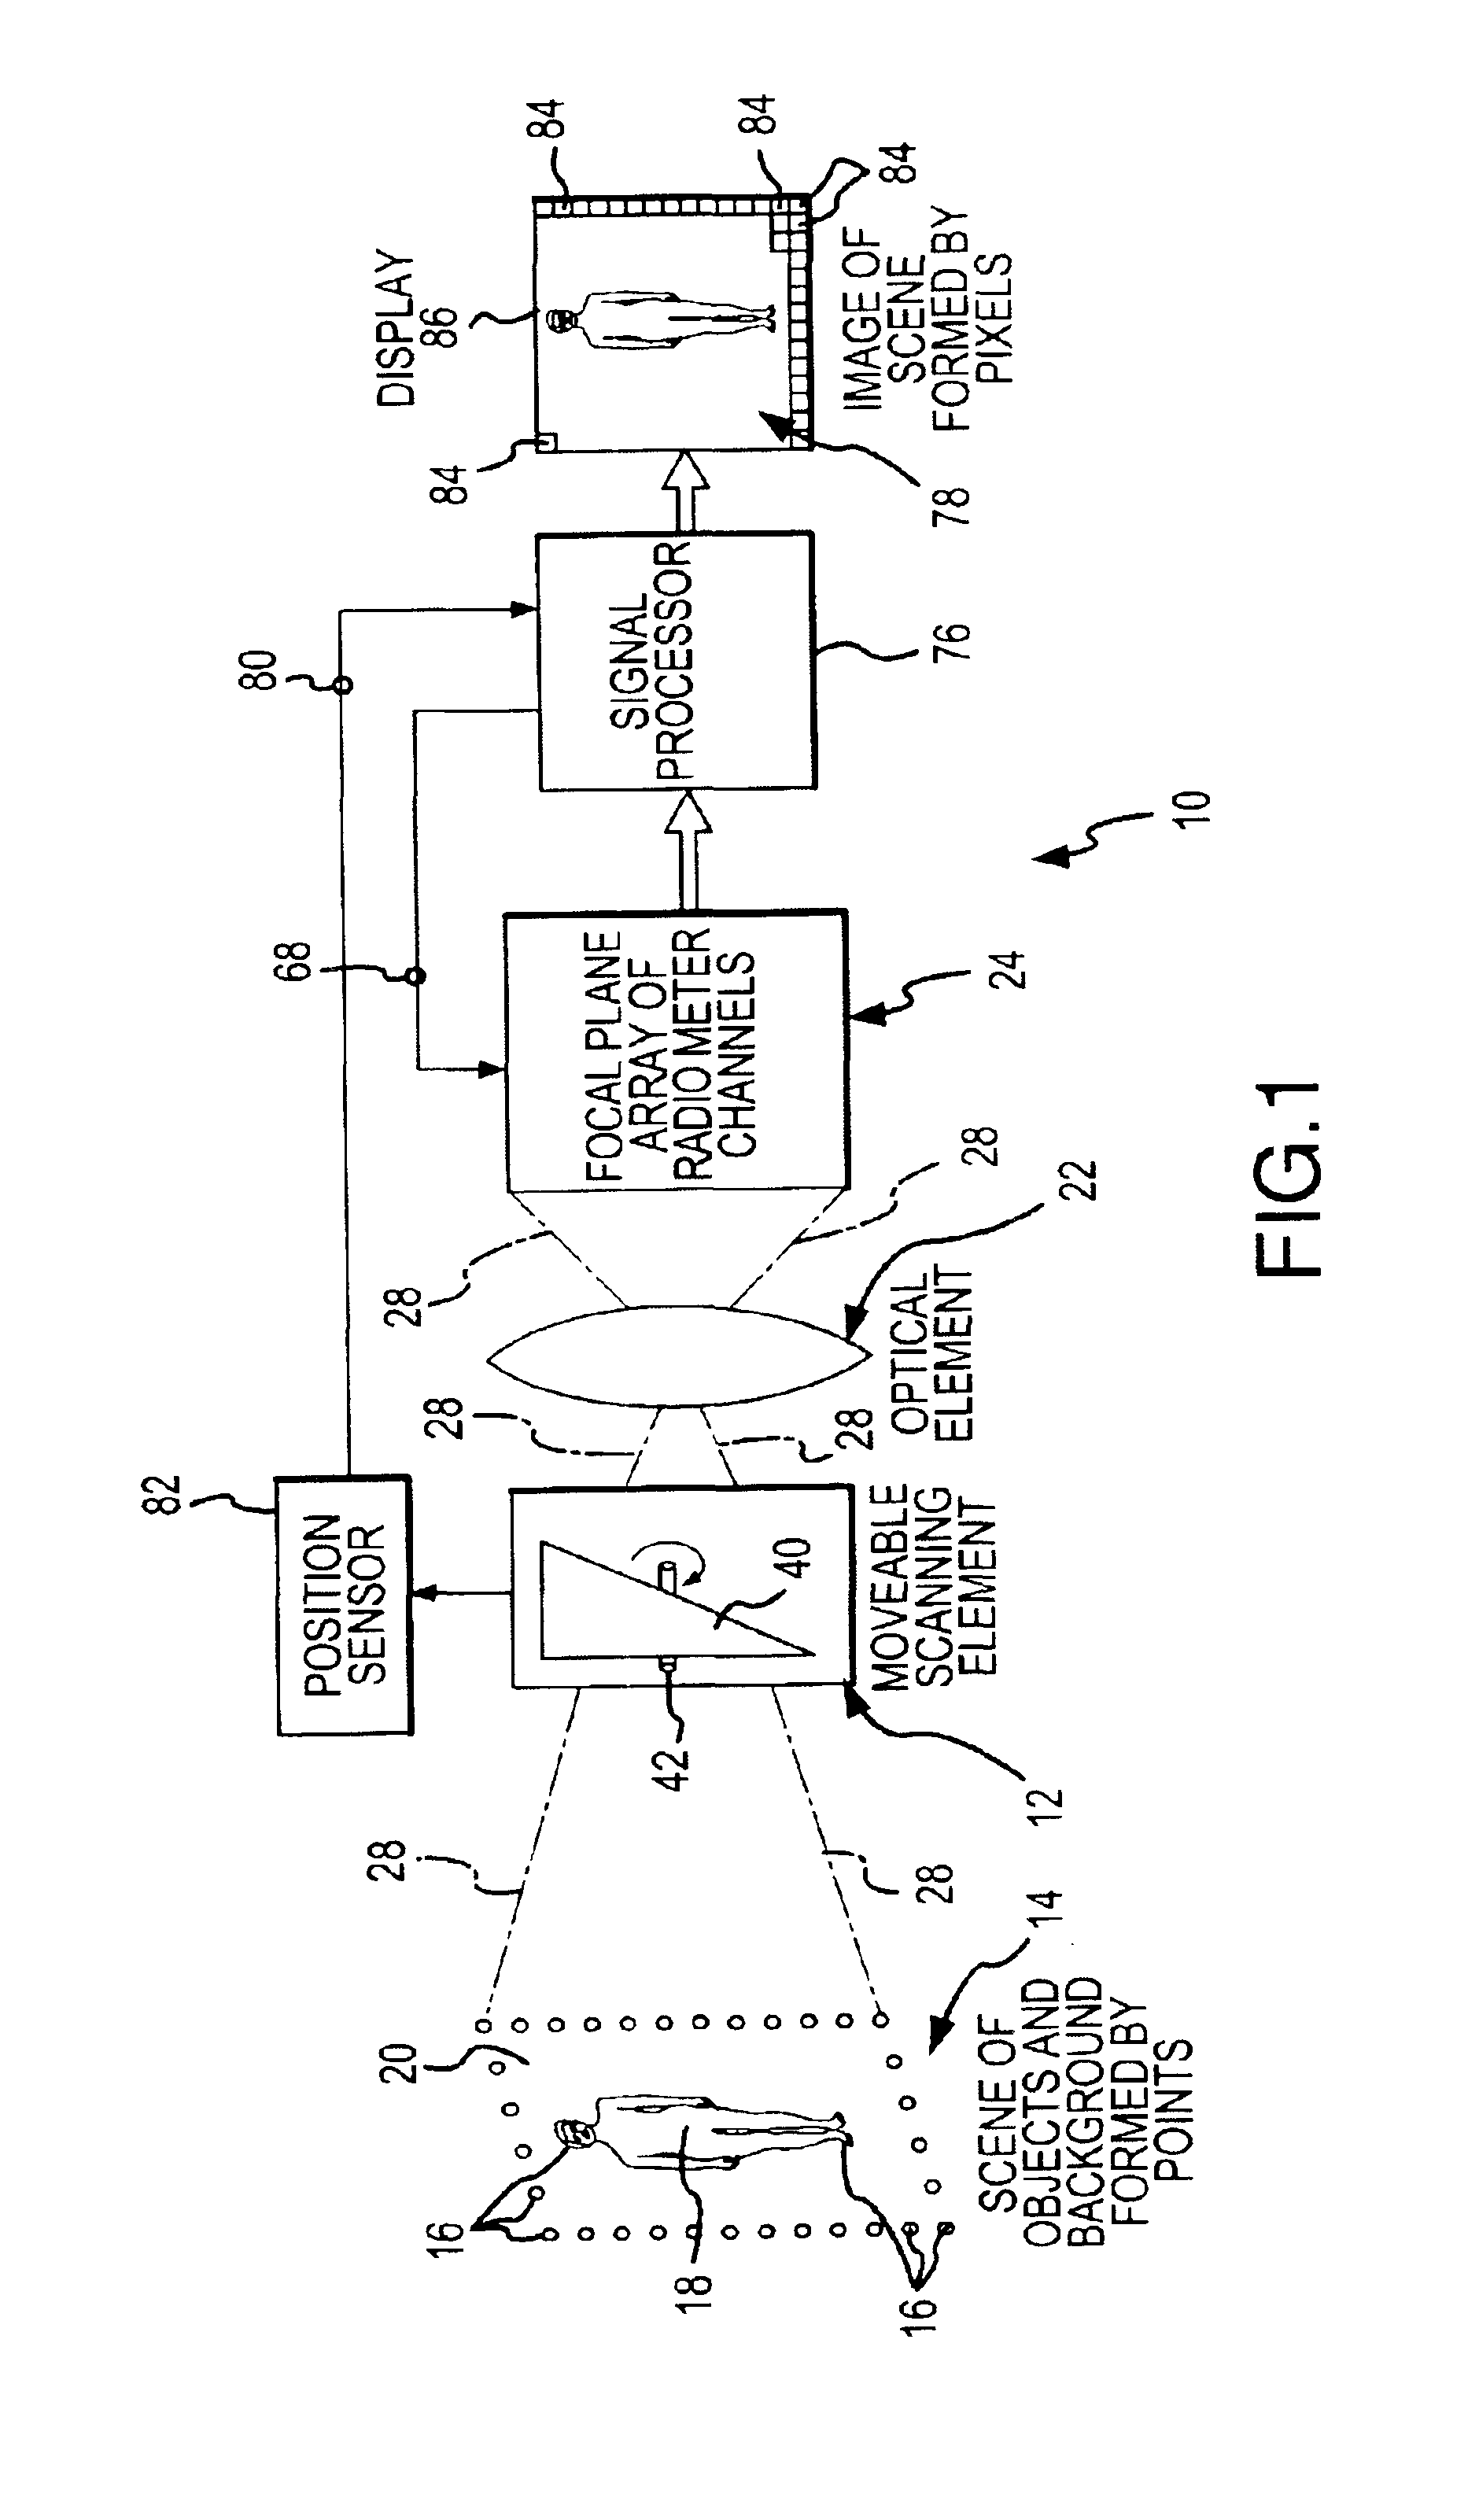 Weighted noise compensating method and camera used in millimeter wave imaging